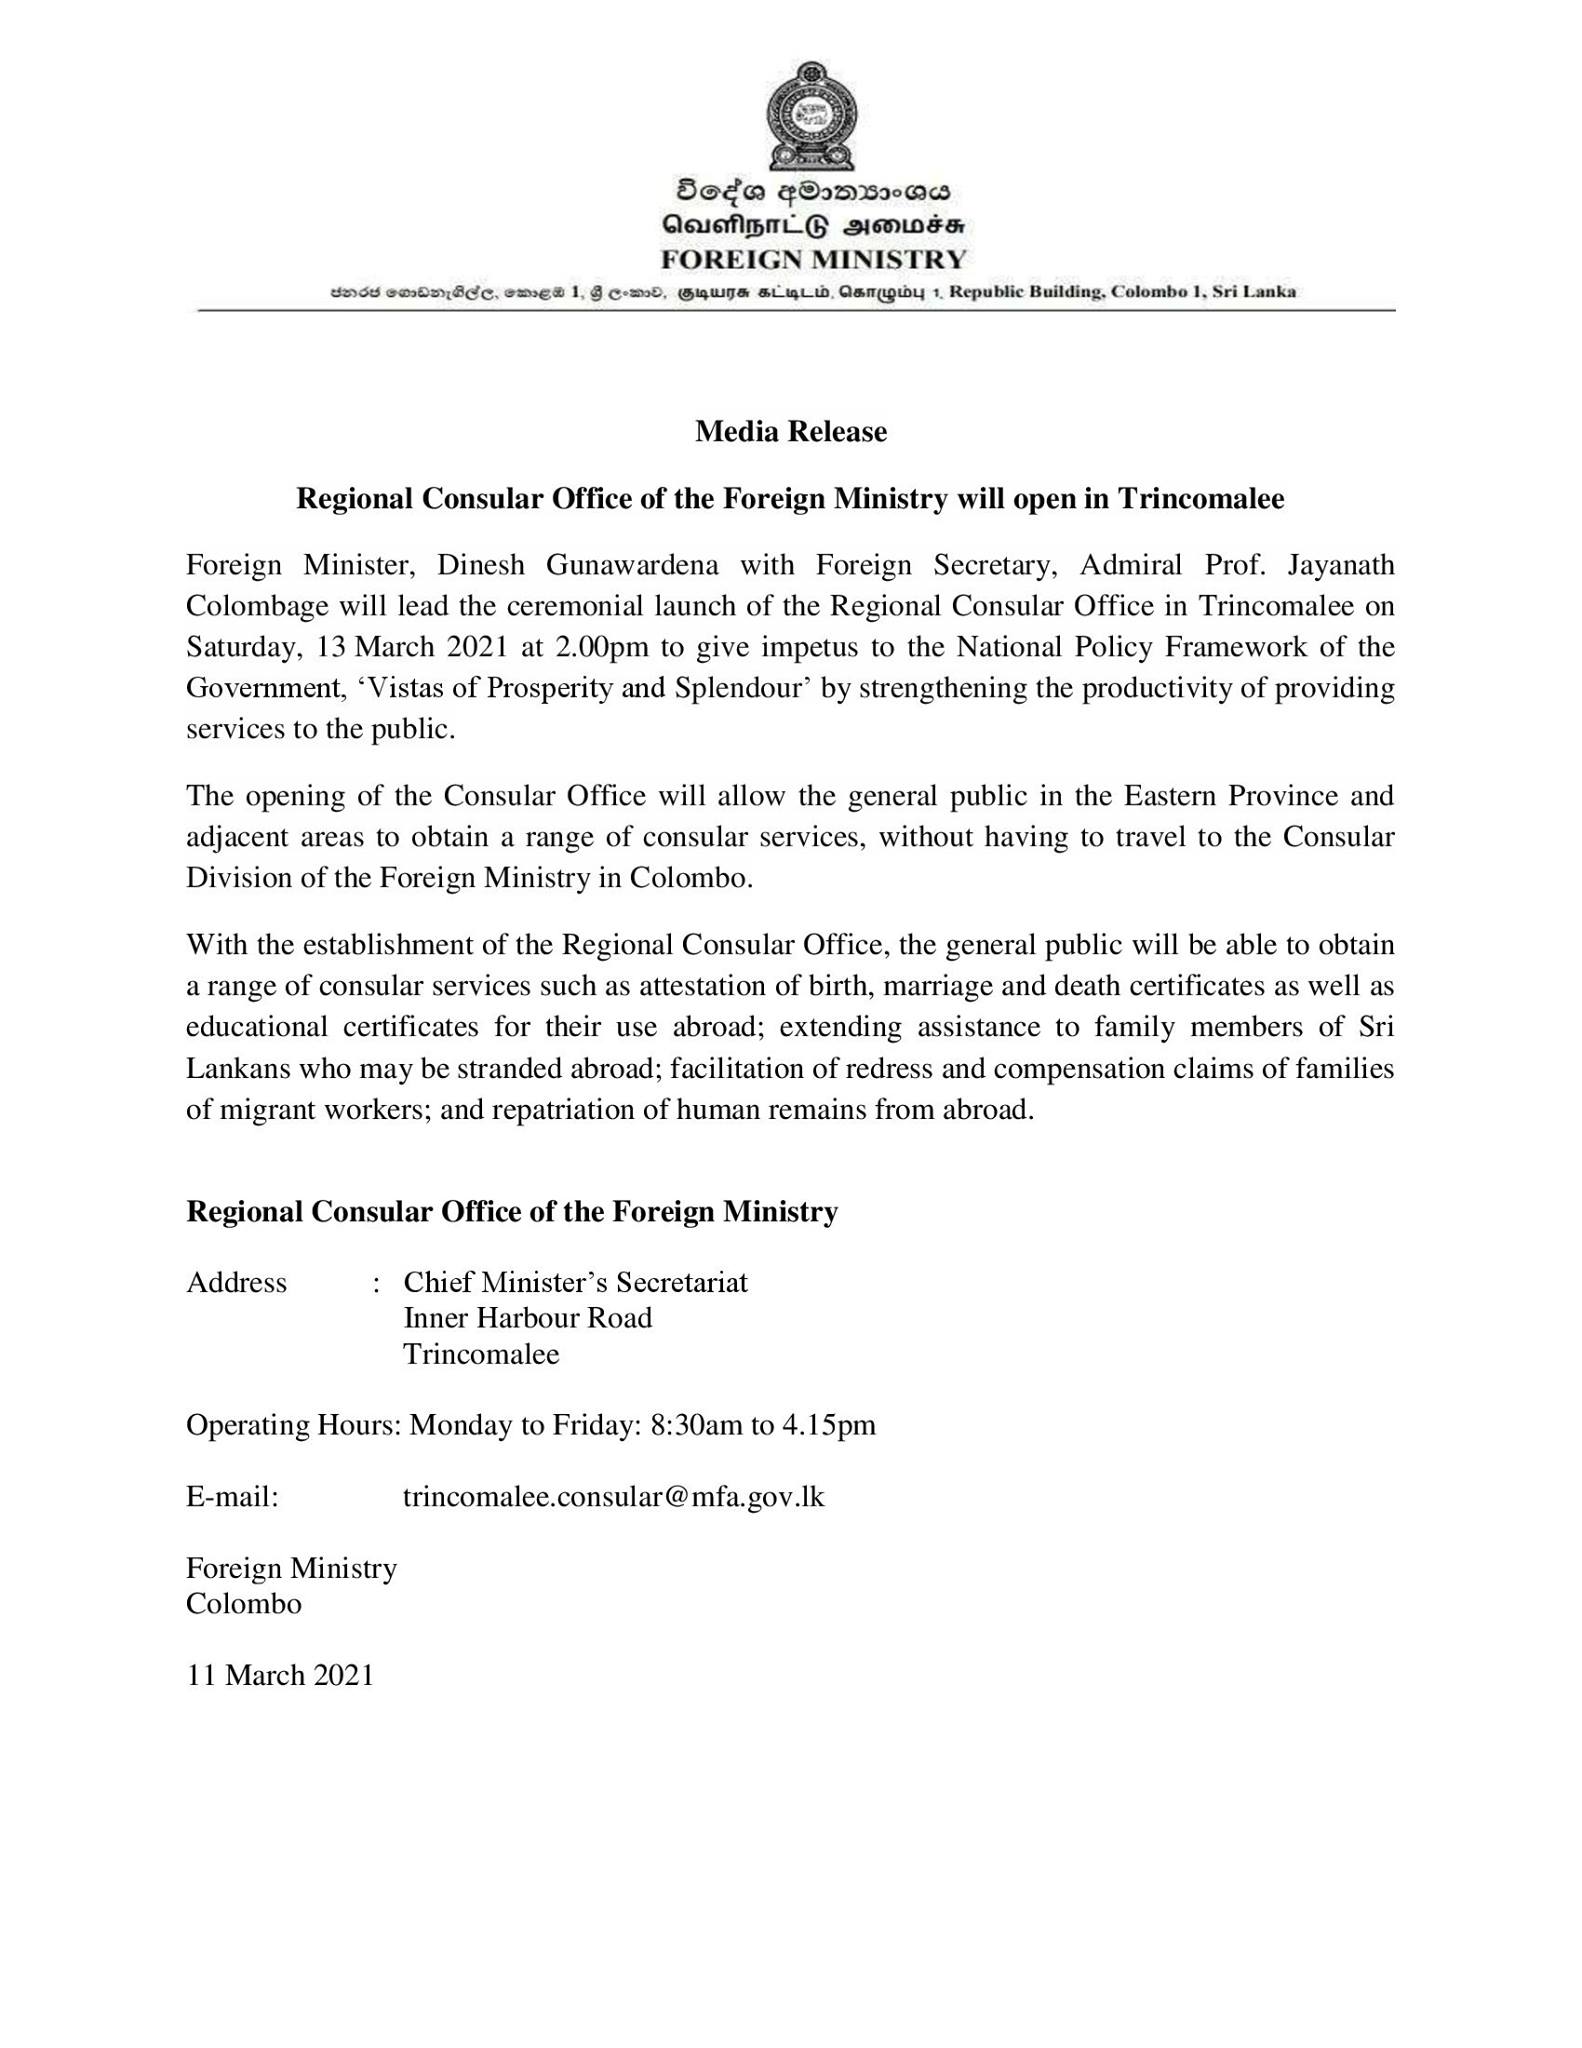 Regional Consular Office of the Foreign Ministry will open in Trincomalee